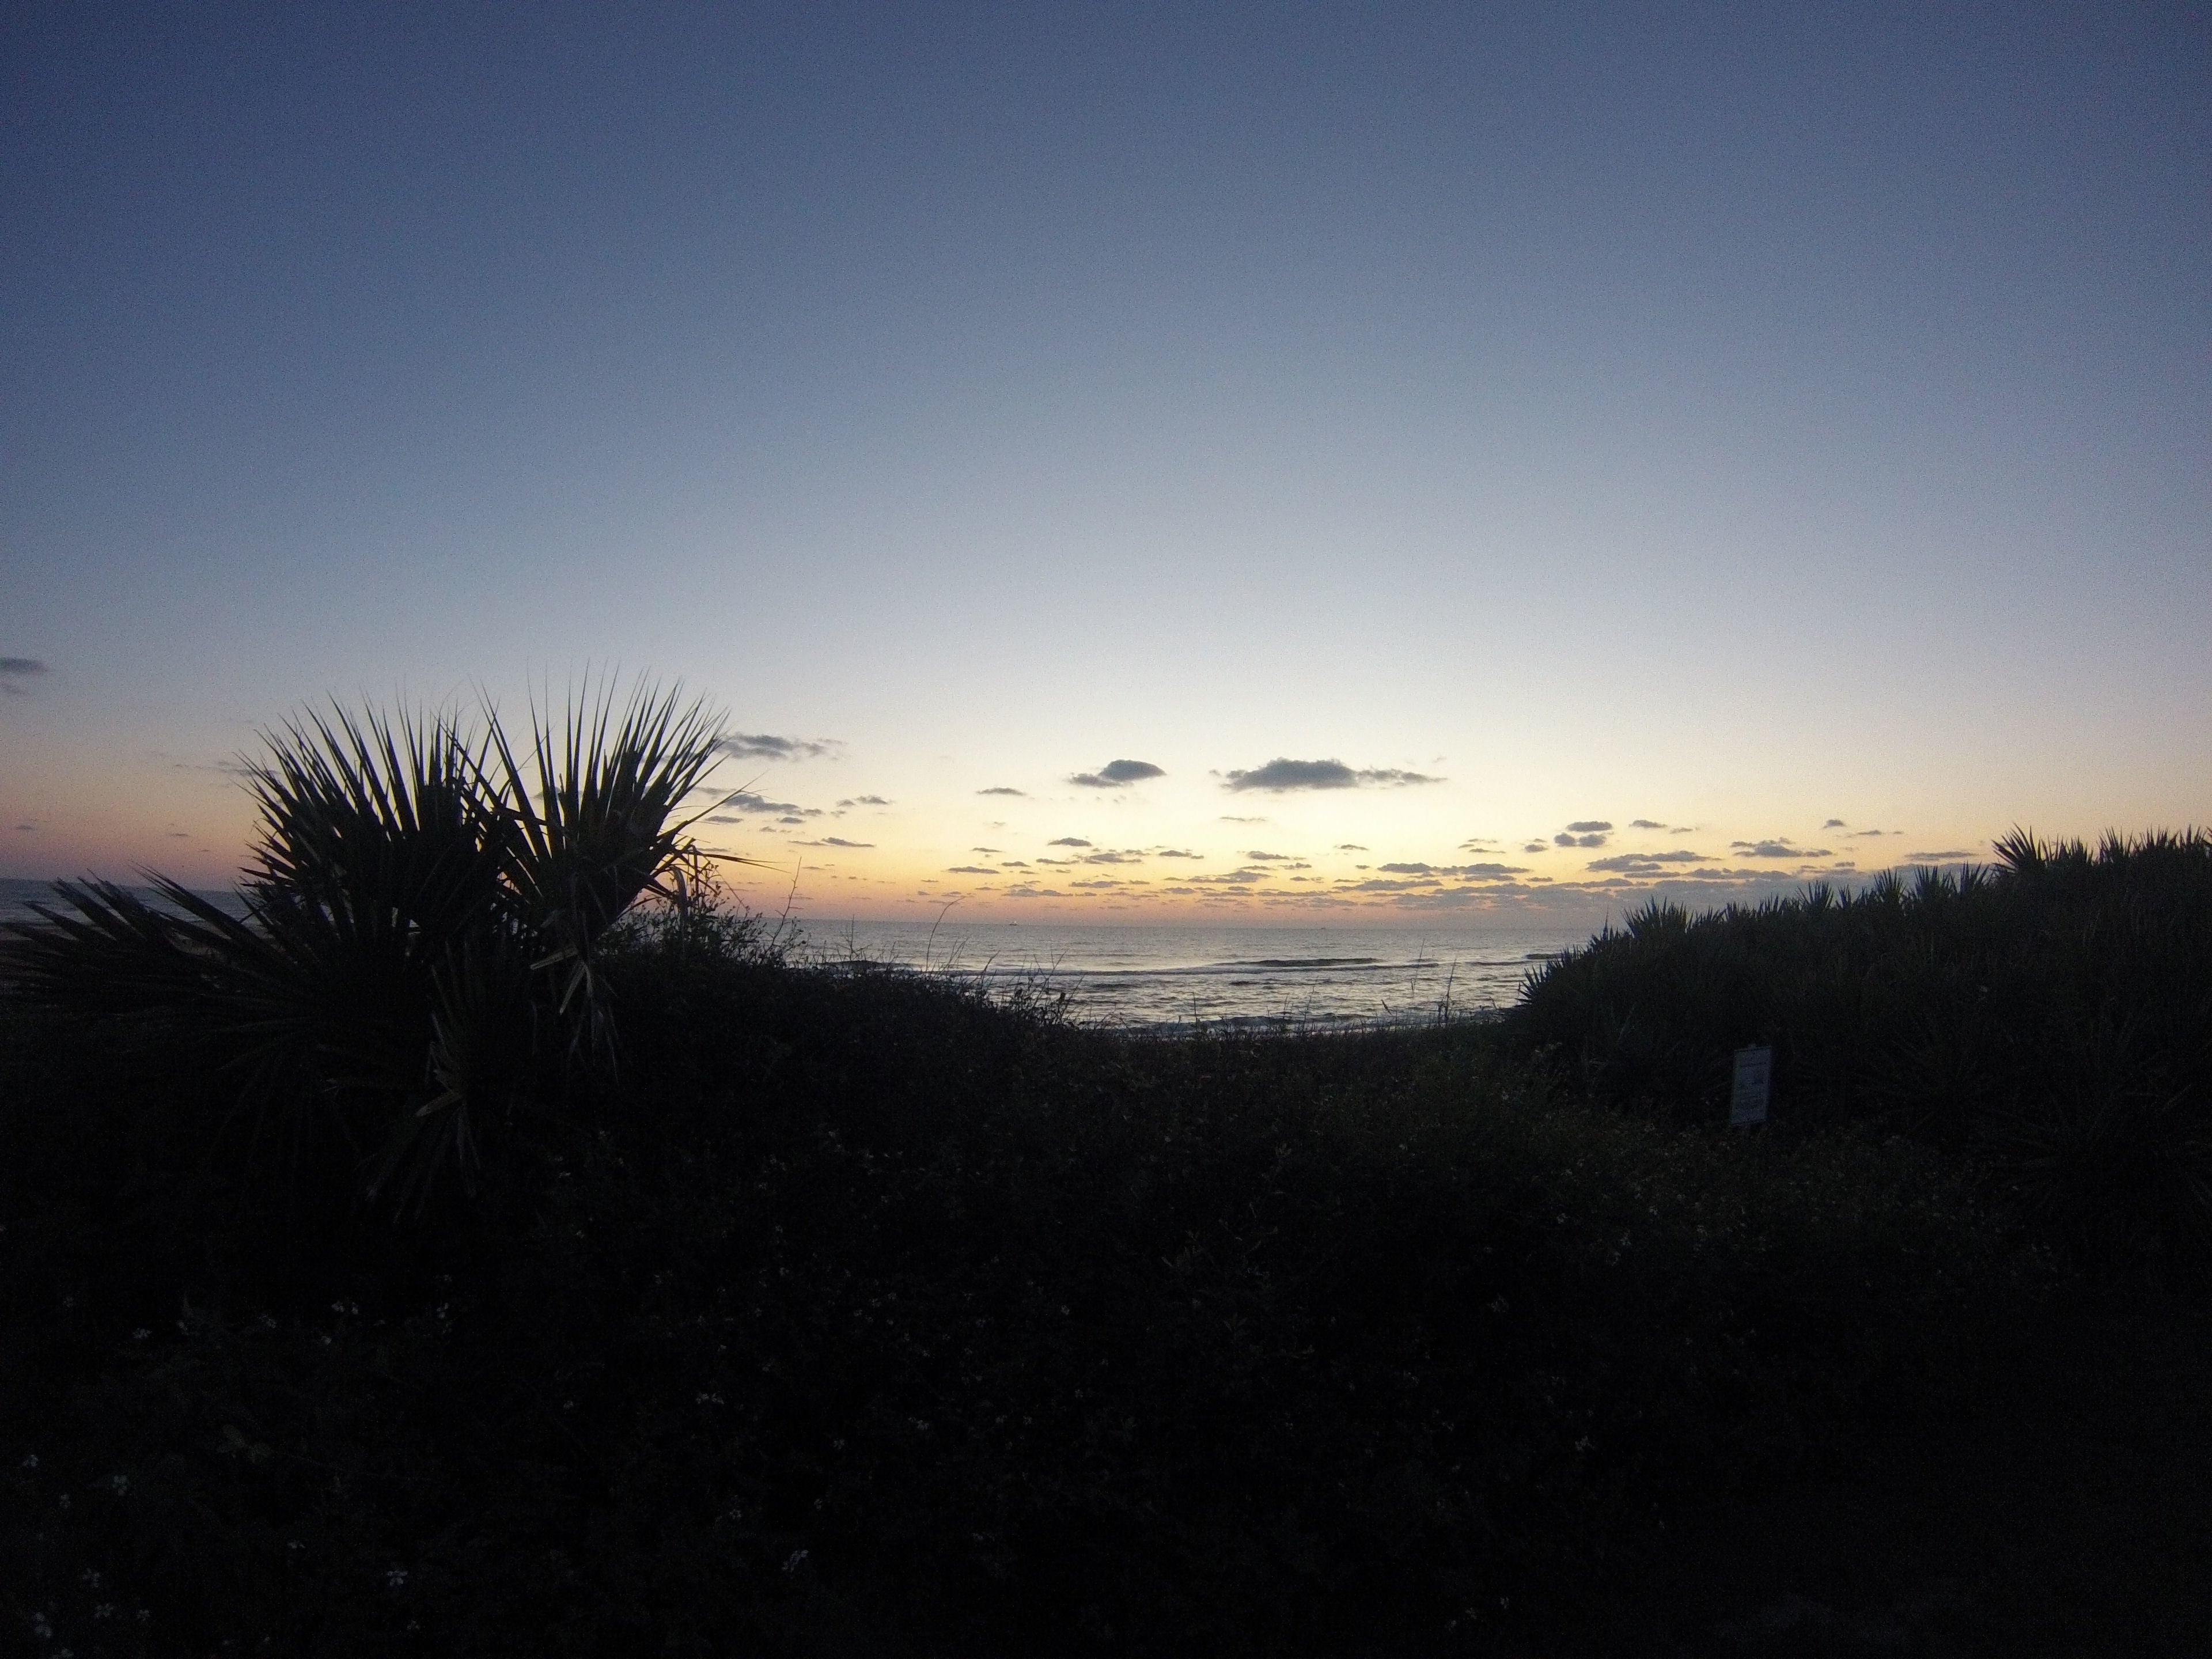 Camper submitted image from Gamble Rogers Memorial State Recreation Area at Flagler Beach - 2